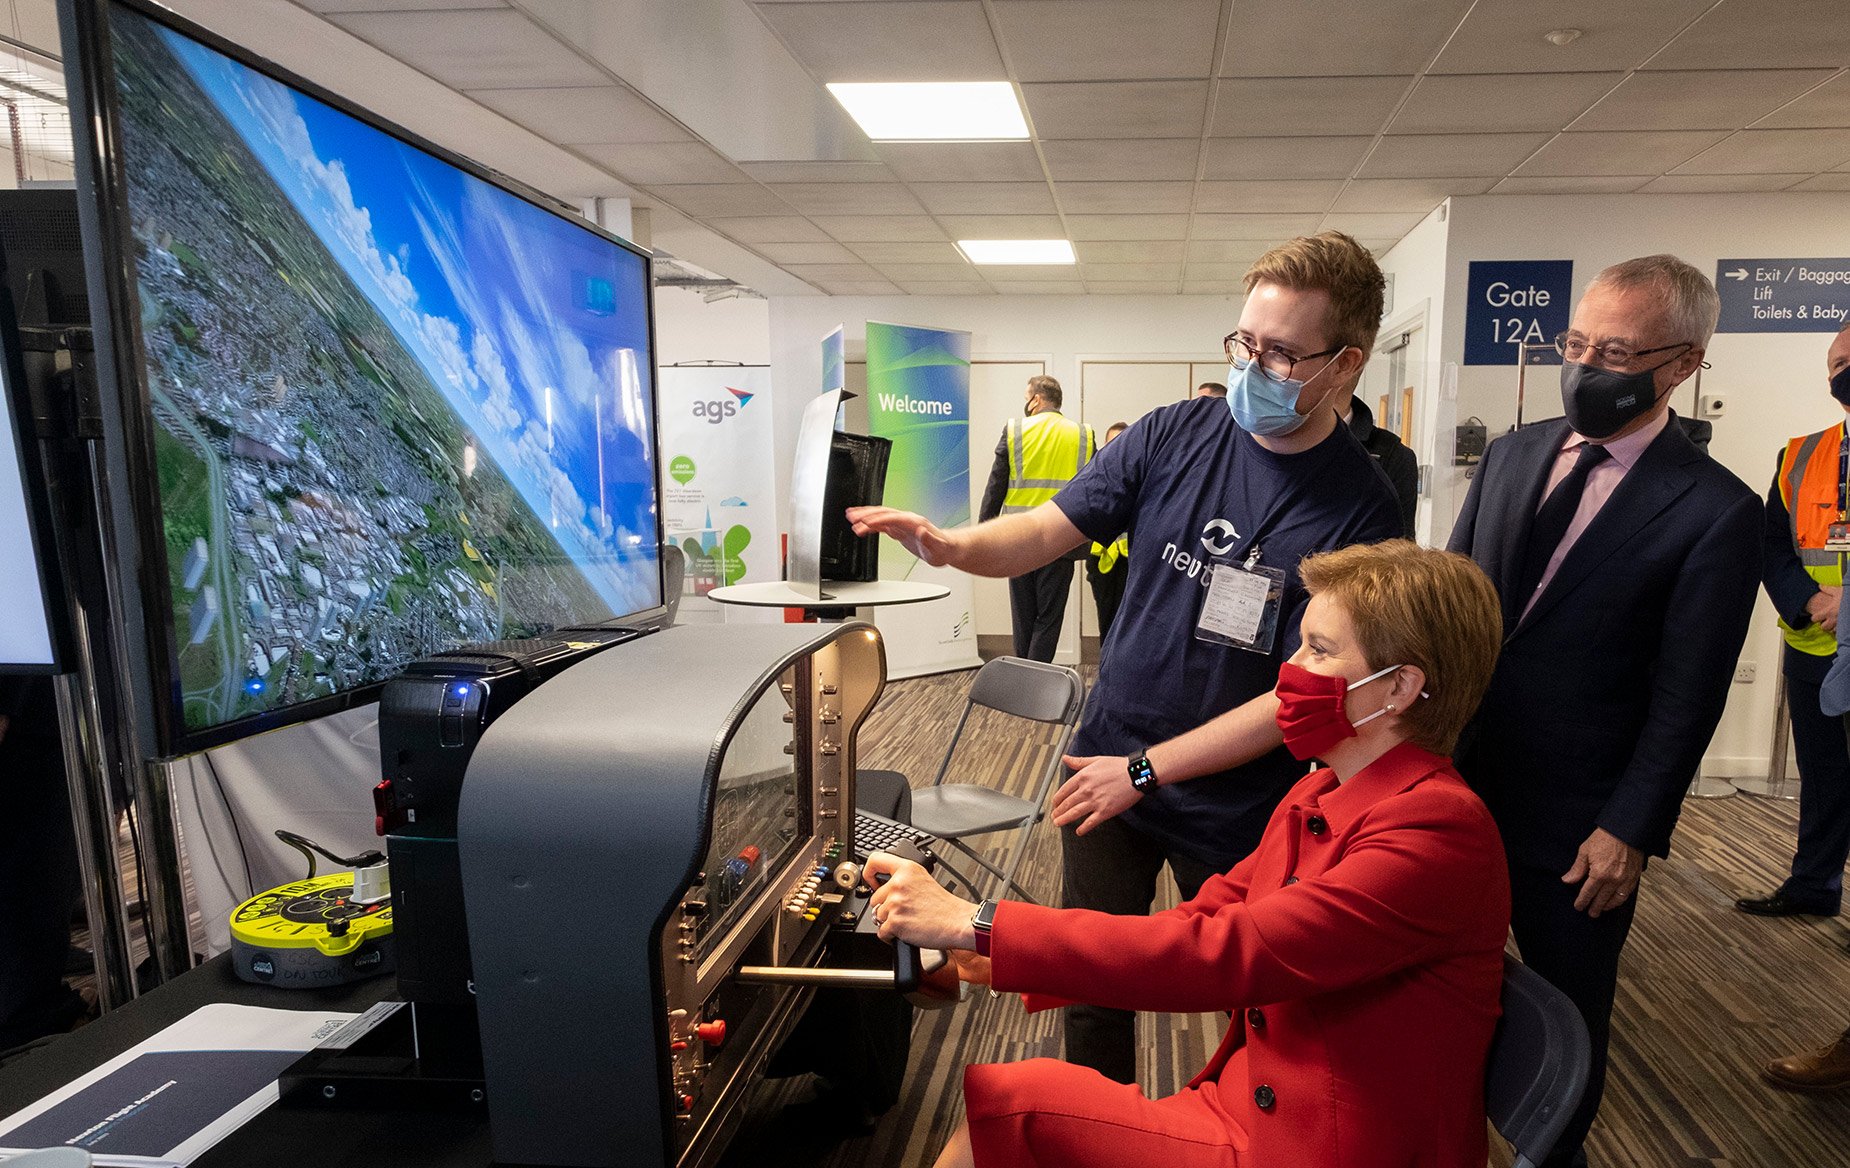 The First Minister, Nicola Sturgeon tried out one of the simulators today at Glasgow Airport, following the launch of the Newton Flight Academy in Glasgow.